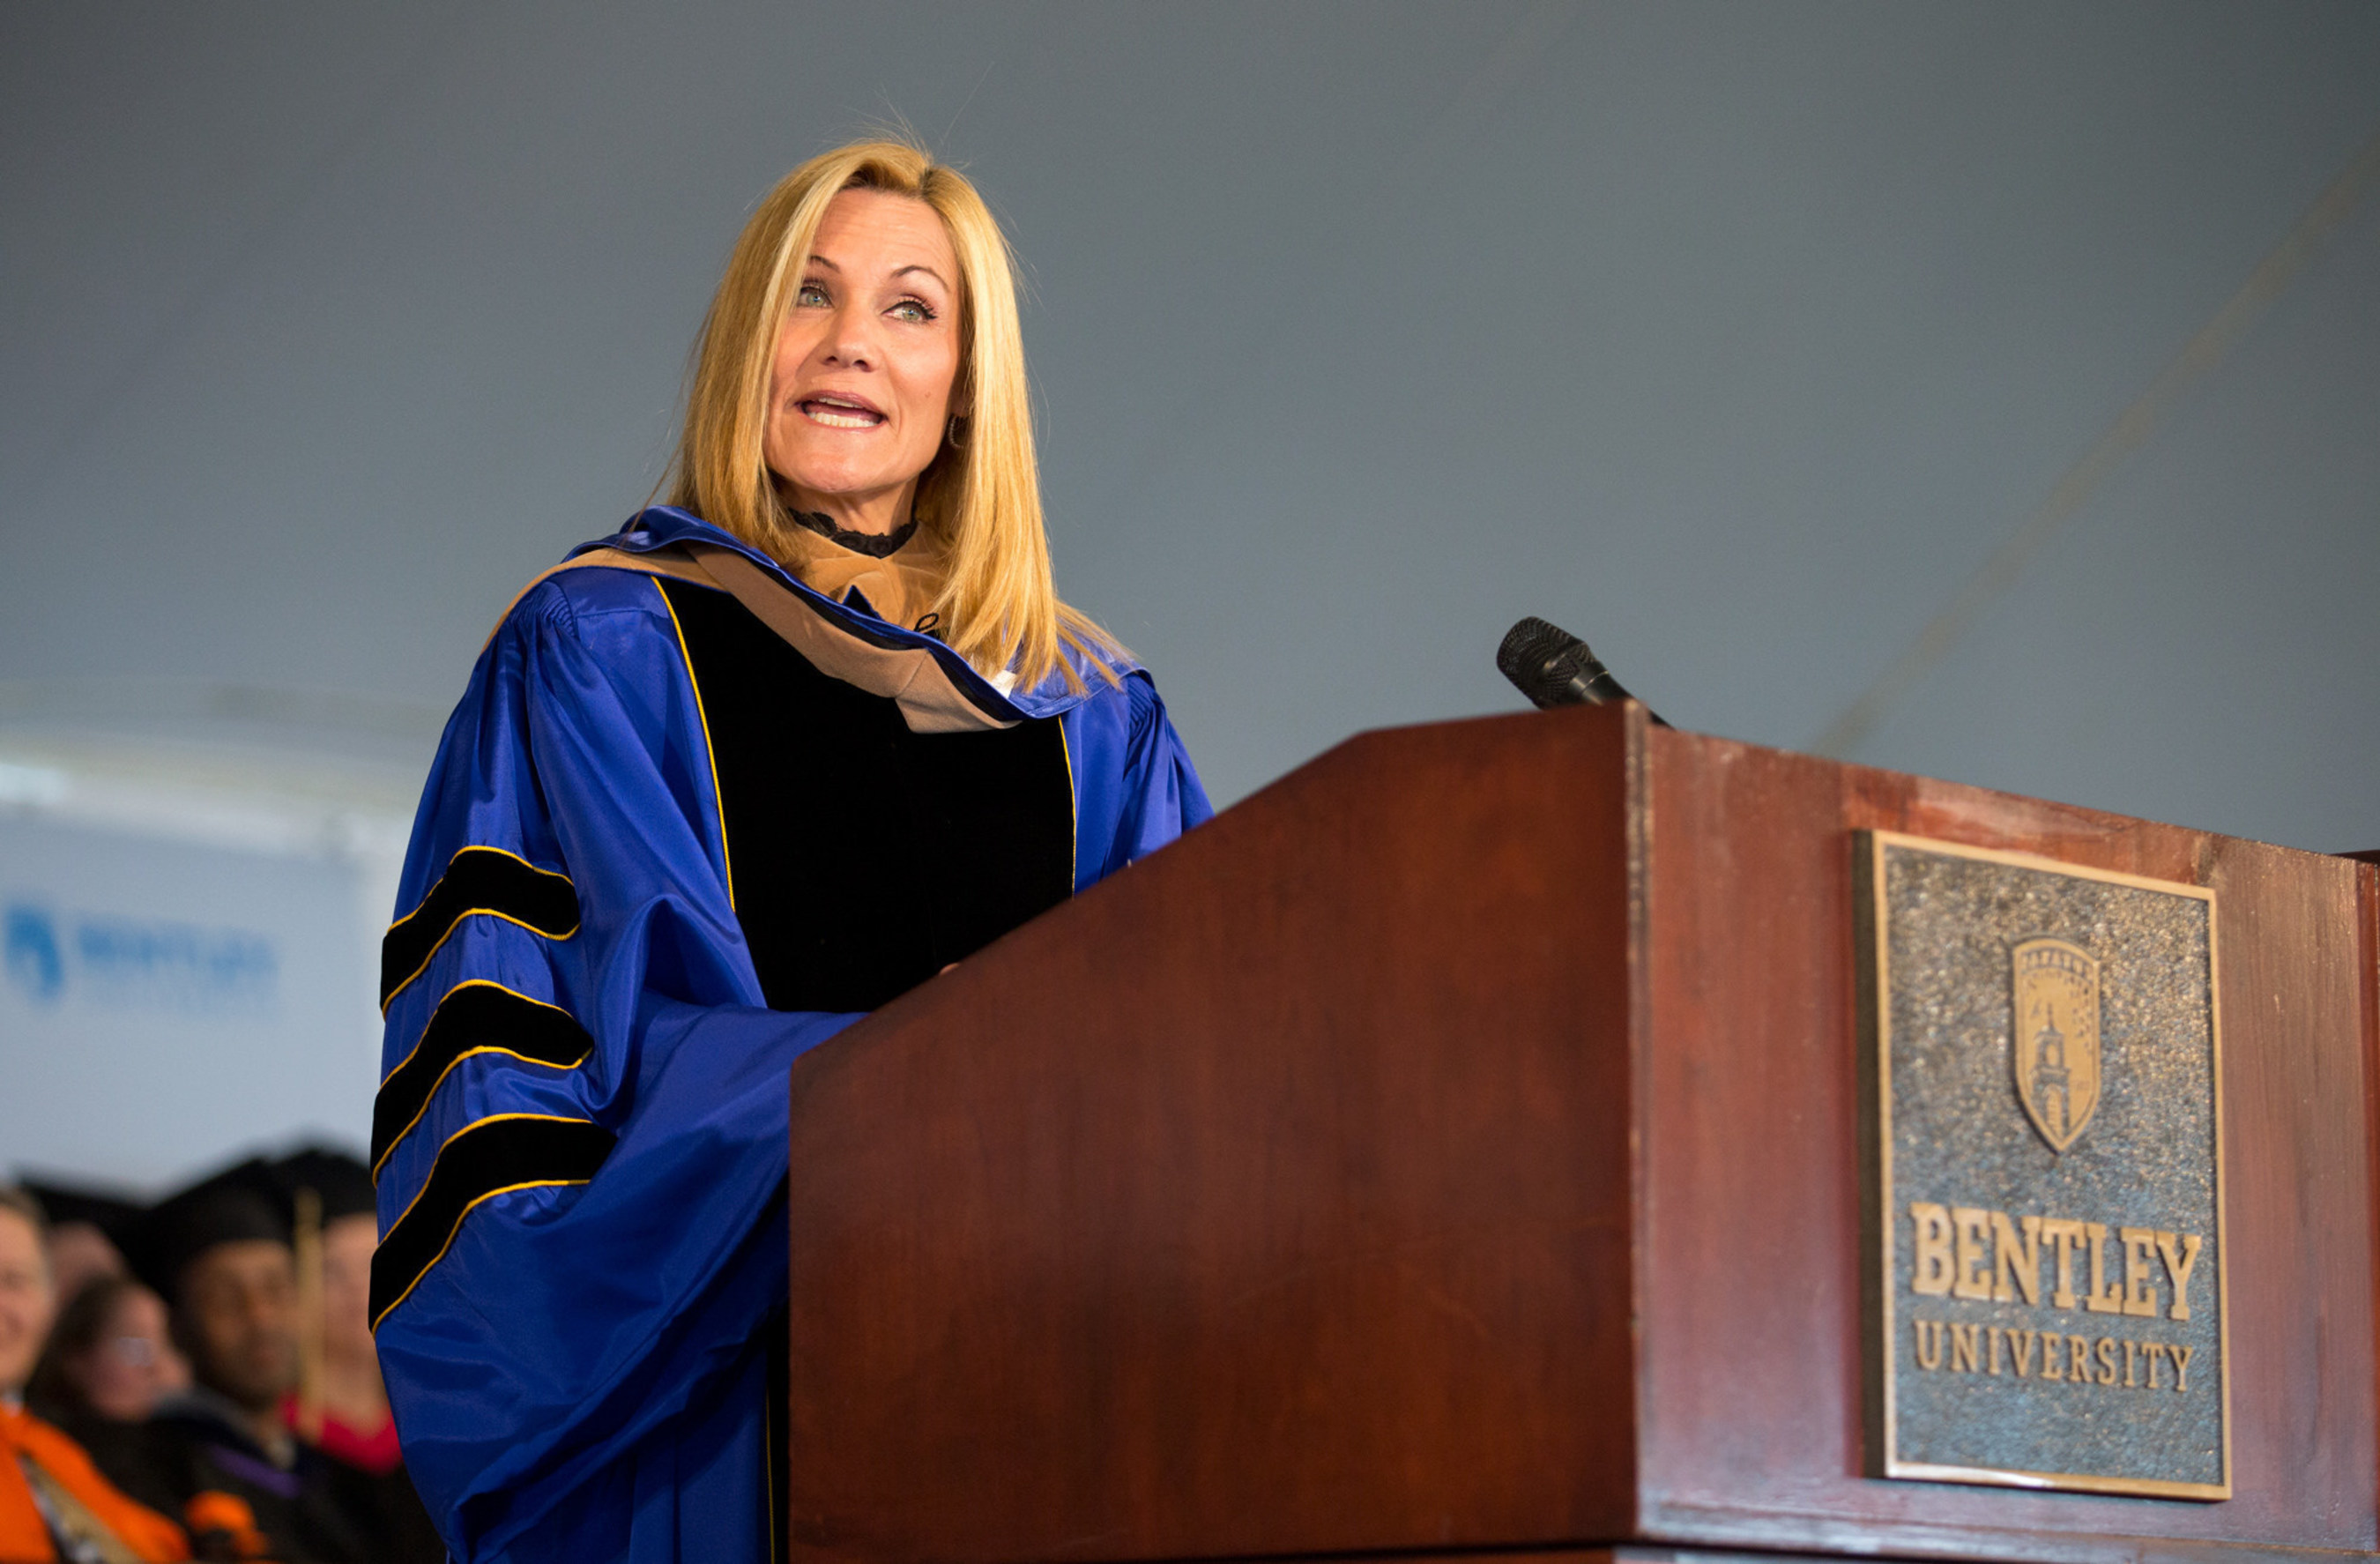 Keynote speaker Karen Kaplan, chairman and CEO of Hill Holliday advertising agency, challenged graduates at Bentley University's 97th annual undergraduate commencement ceremony to be the CEO of every job they hold -- no matter the position. Approximately 8,000 people attended the ceremony held on May 21, 2016.